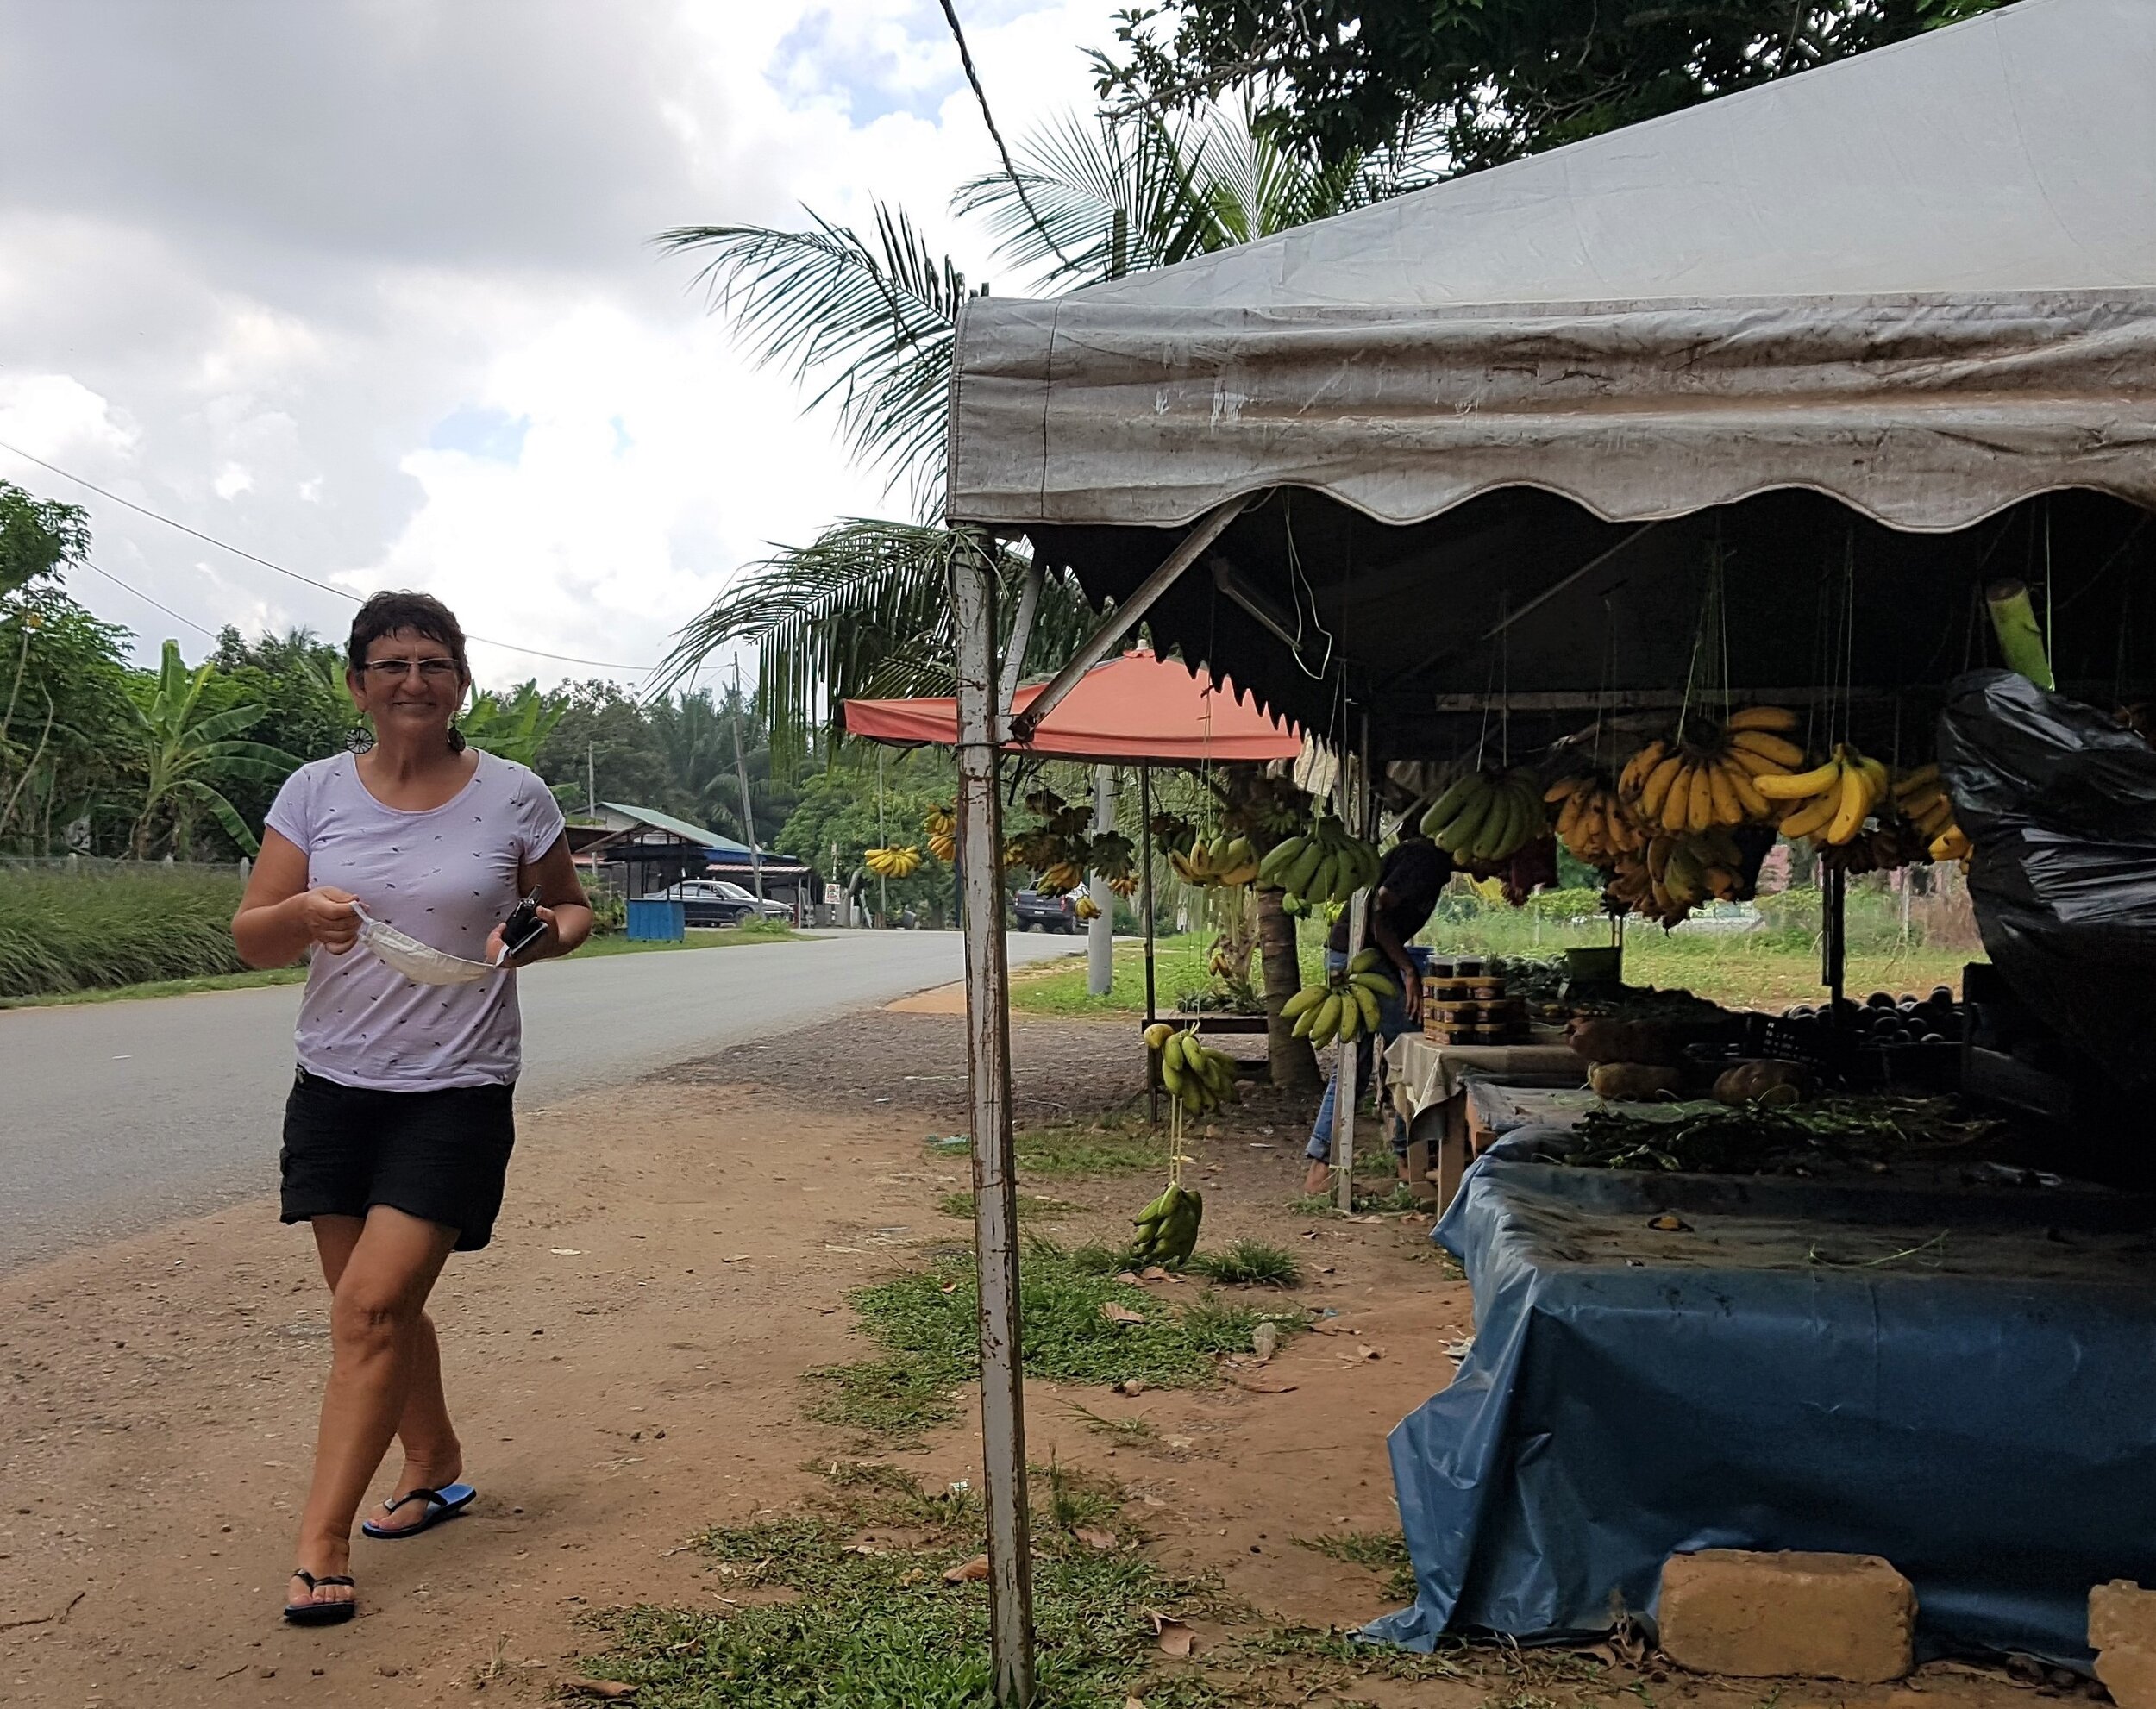 Stopping at roadside food stand